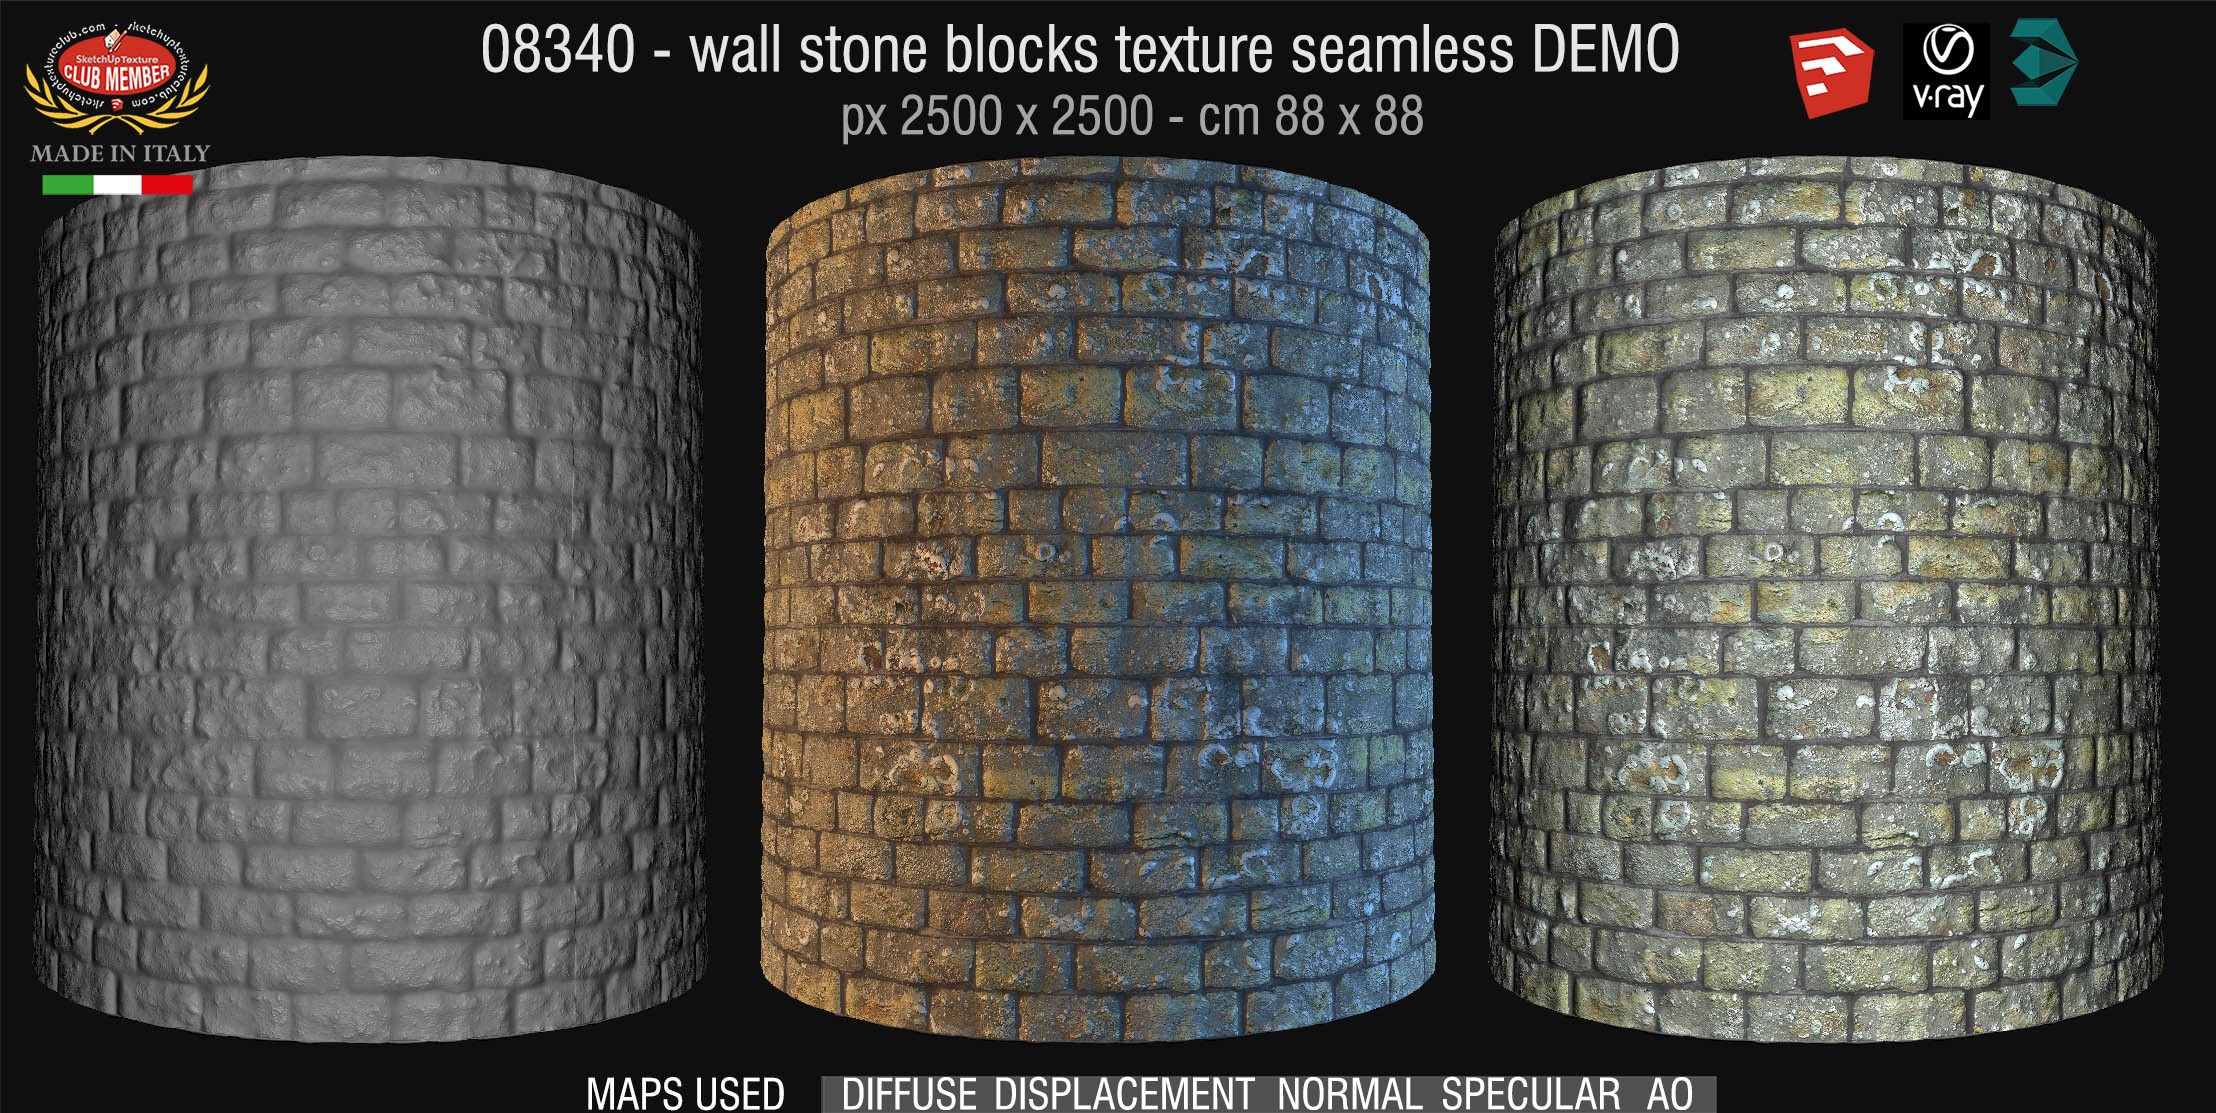 08340 HR Wall stone with regular blocks texture + maps DEMO